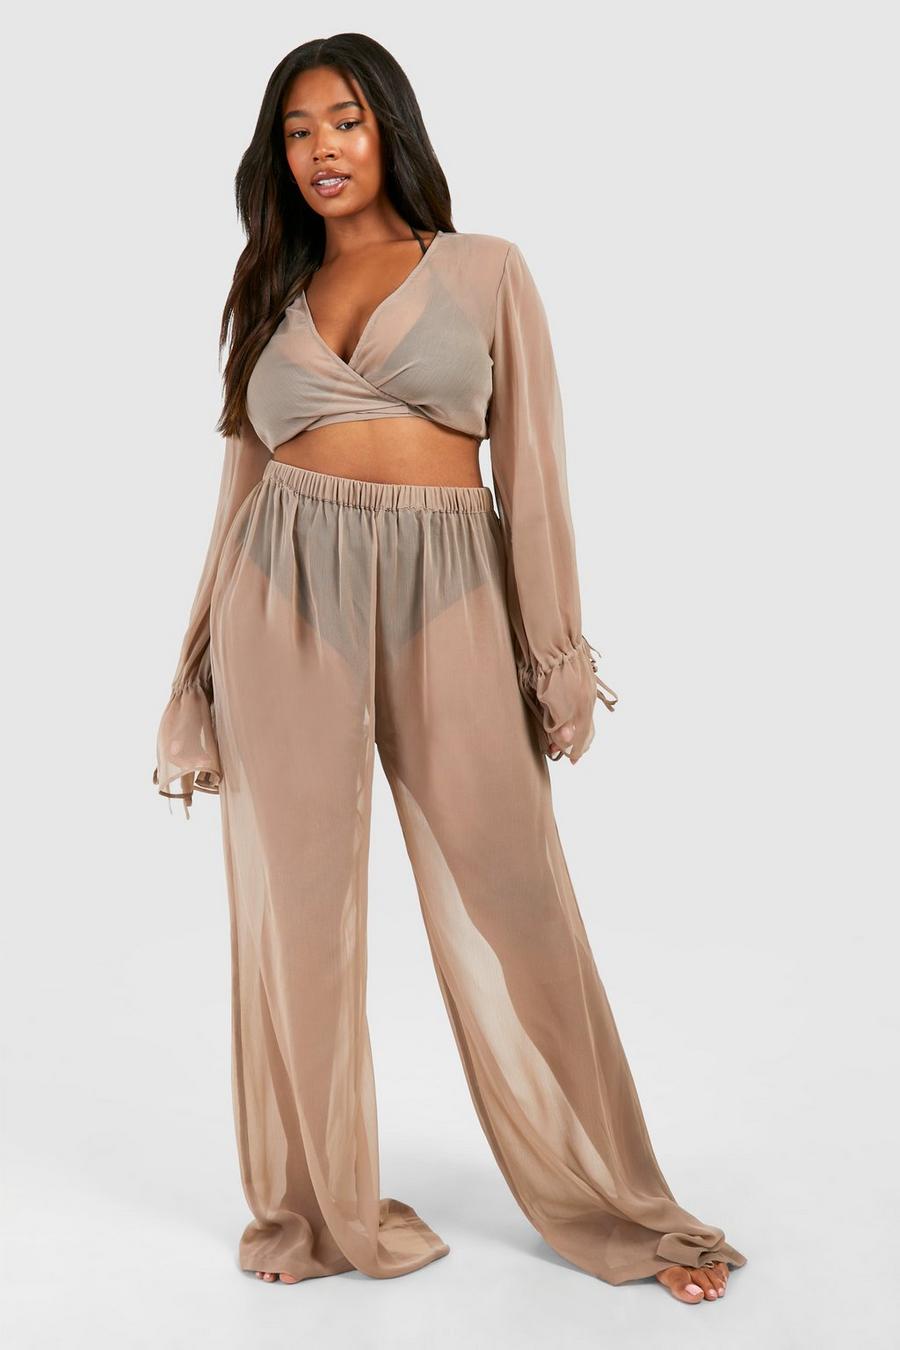 Taupe Plus Tie Crop Top And Beach Pants